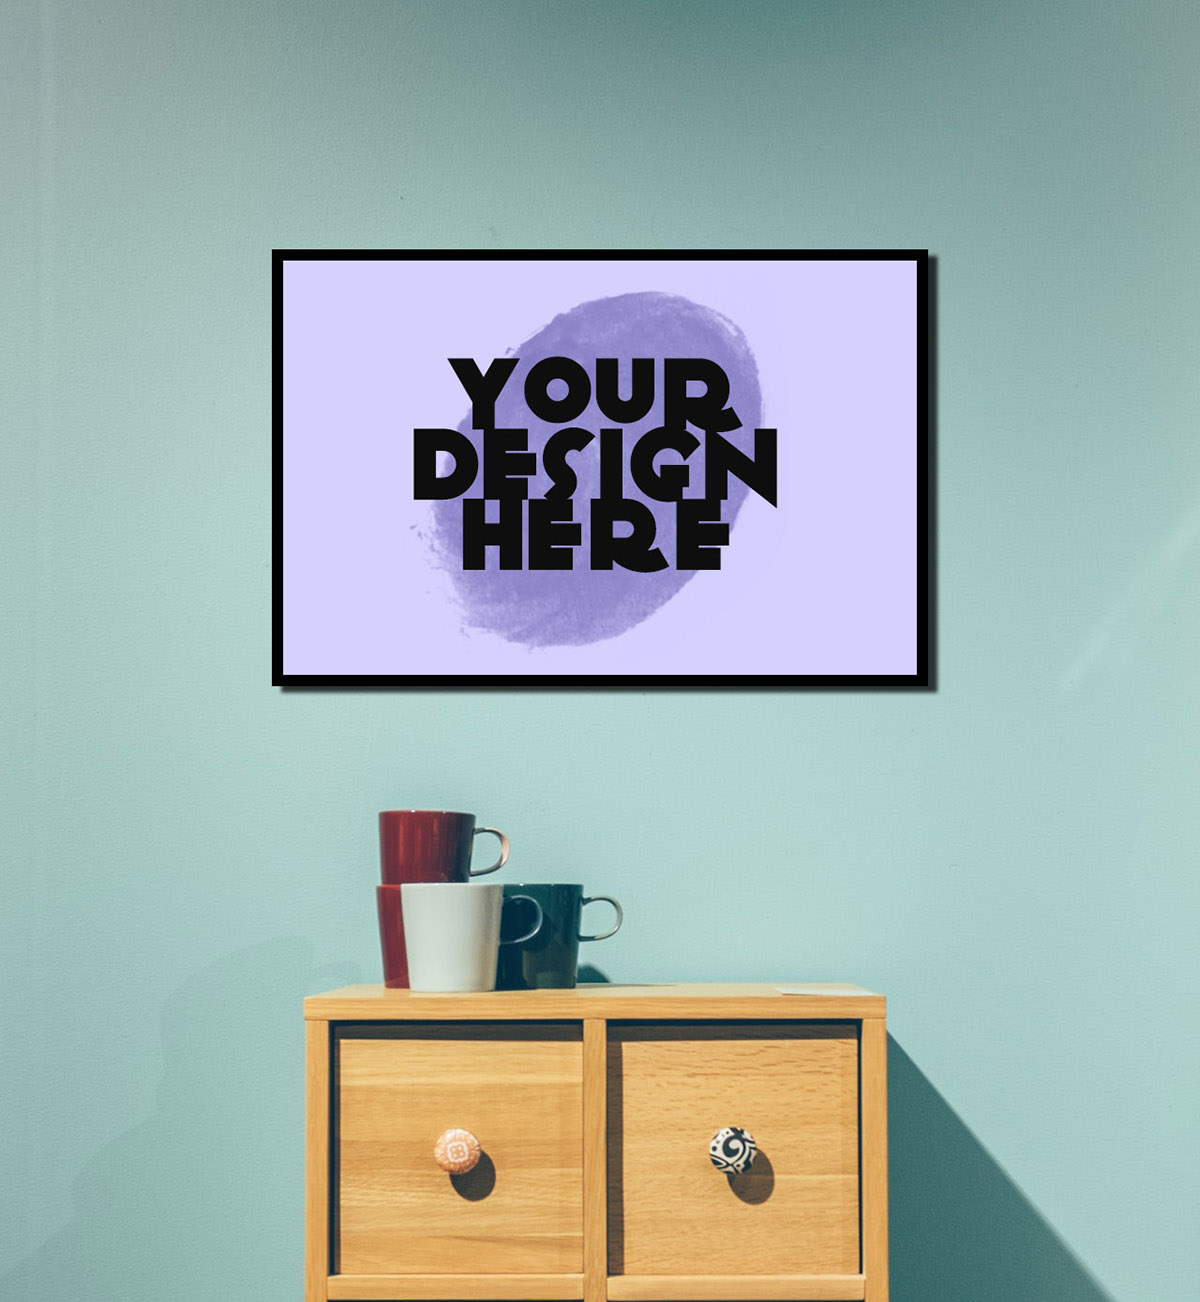 Download Horizontal Poster Mockup Free Commercial Use on Behance